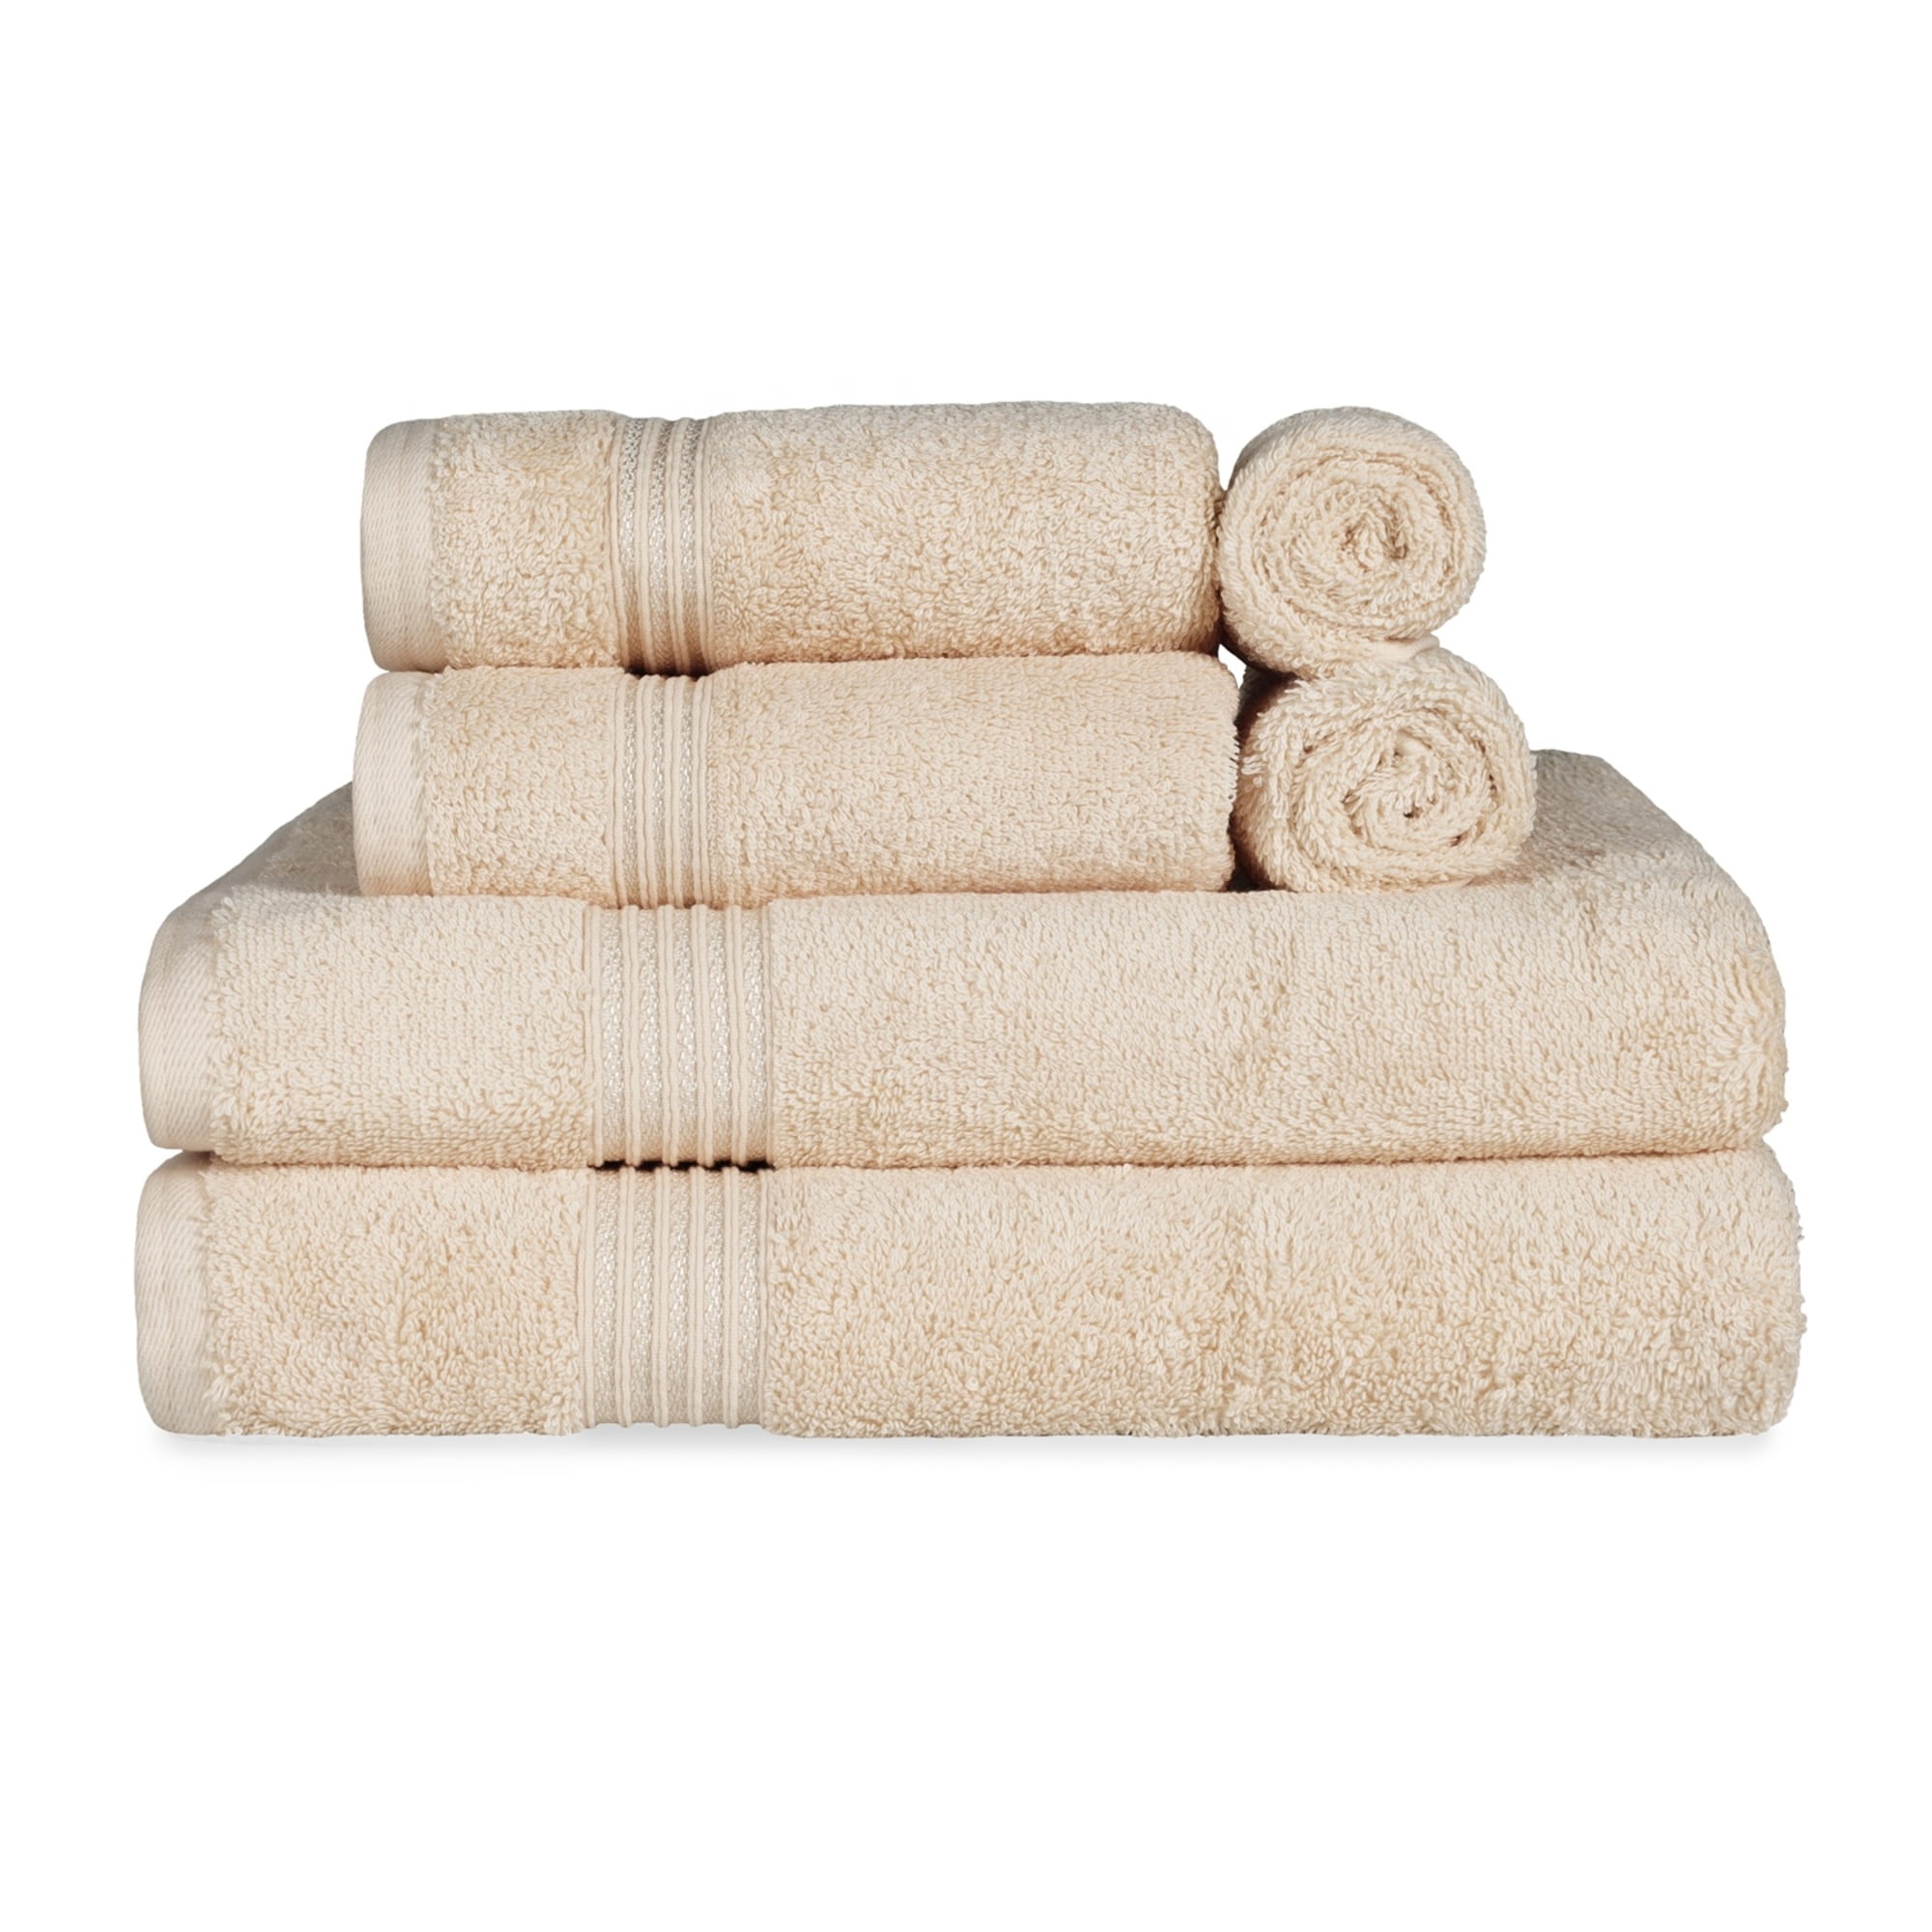 Bath Towels, Pack of 1, Egyptian Cotton Towel, 100% Cotton 13*30Inch Highly  Absorbent (Beige)By TORUBIA